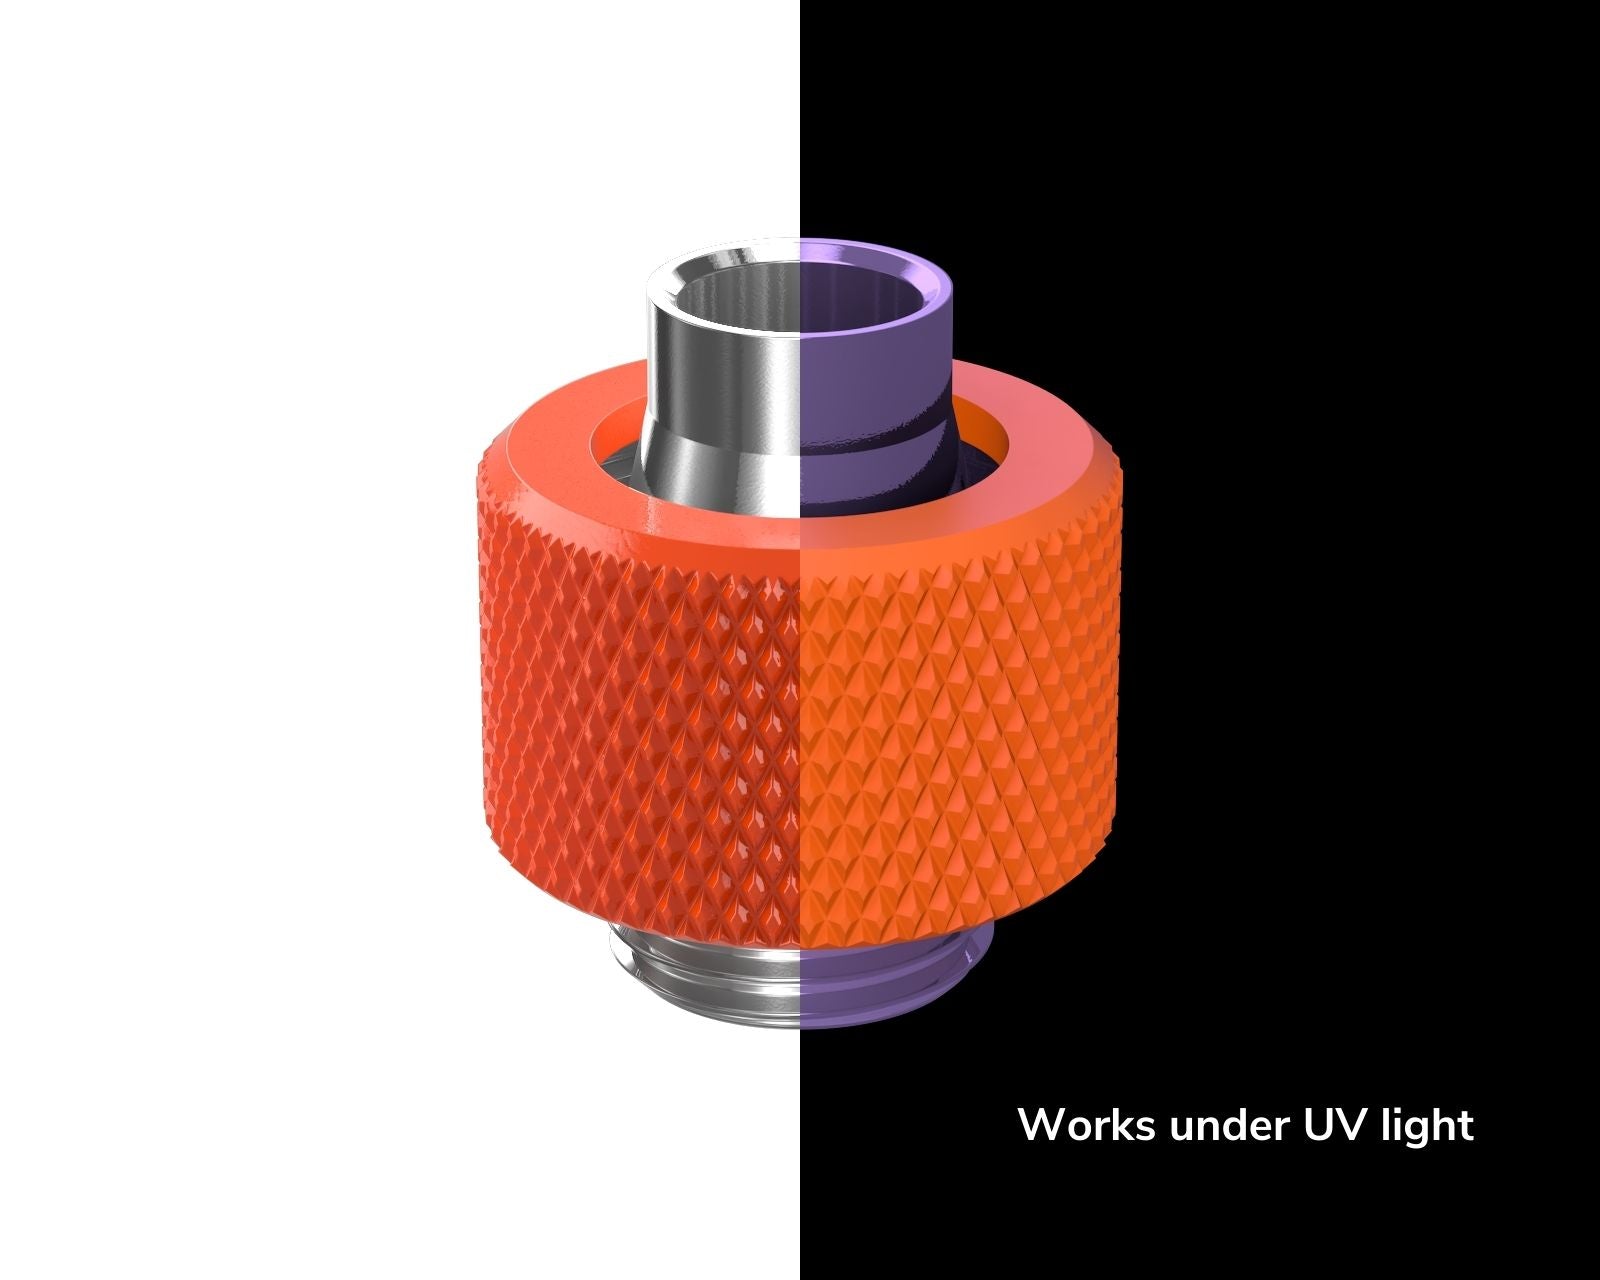 PrimoChill SecureFit SX - Premium Compression Fitting For 3/8in ID x 1/2in OD Flexible Tubing (F-SFSX12) - Available in 20+ Colors, Custom Watercooling Loop Ready - UV Orange